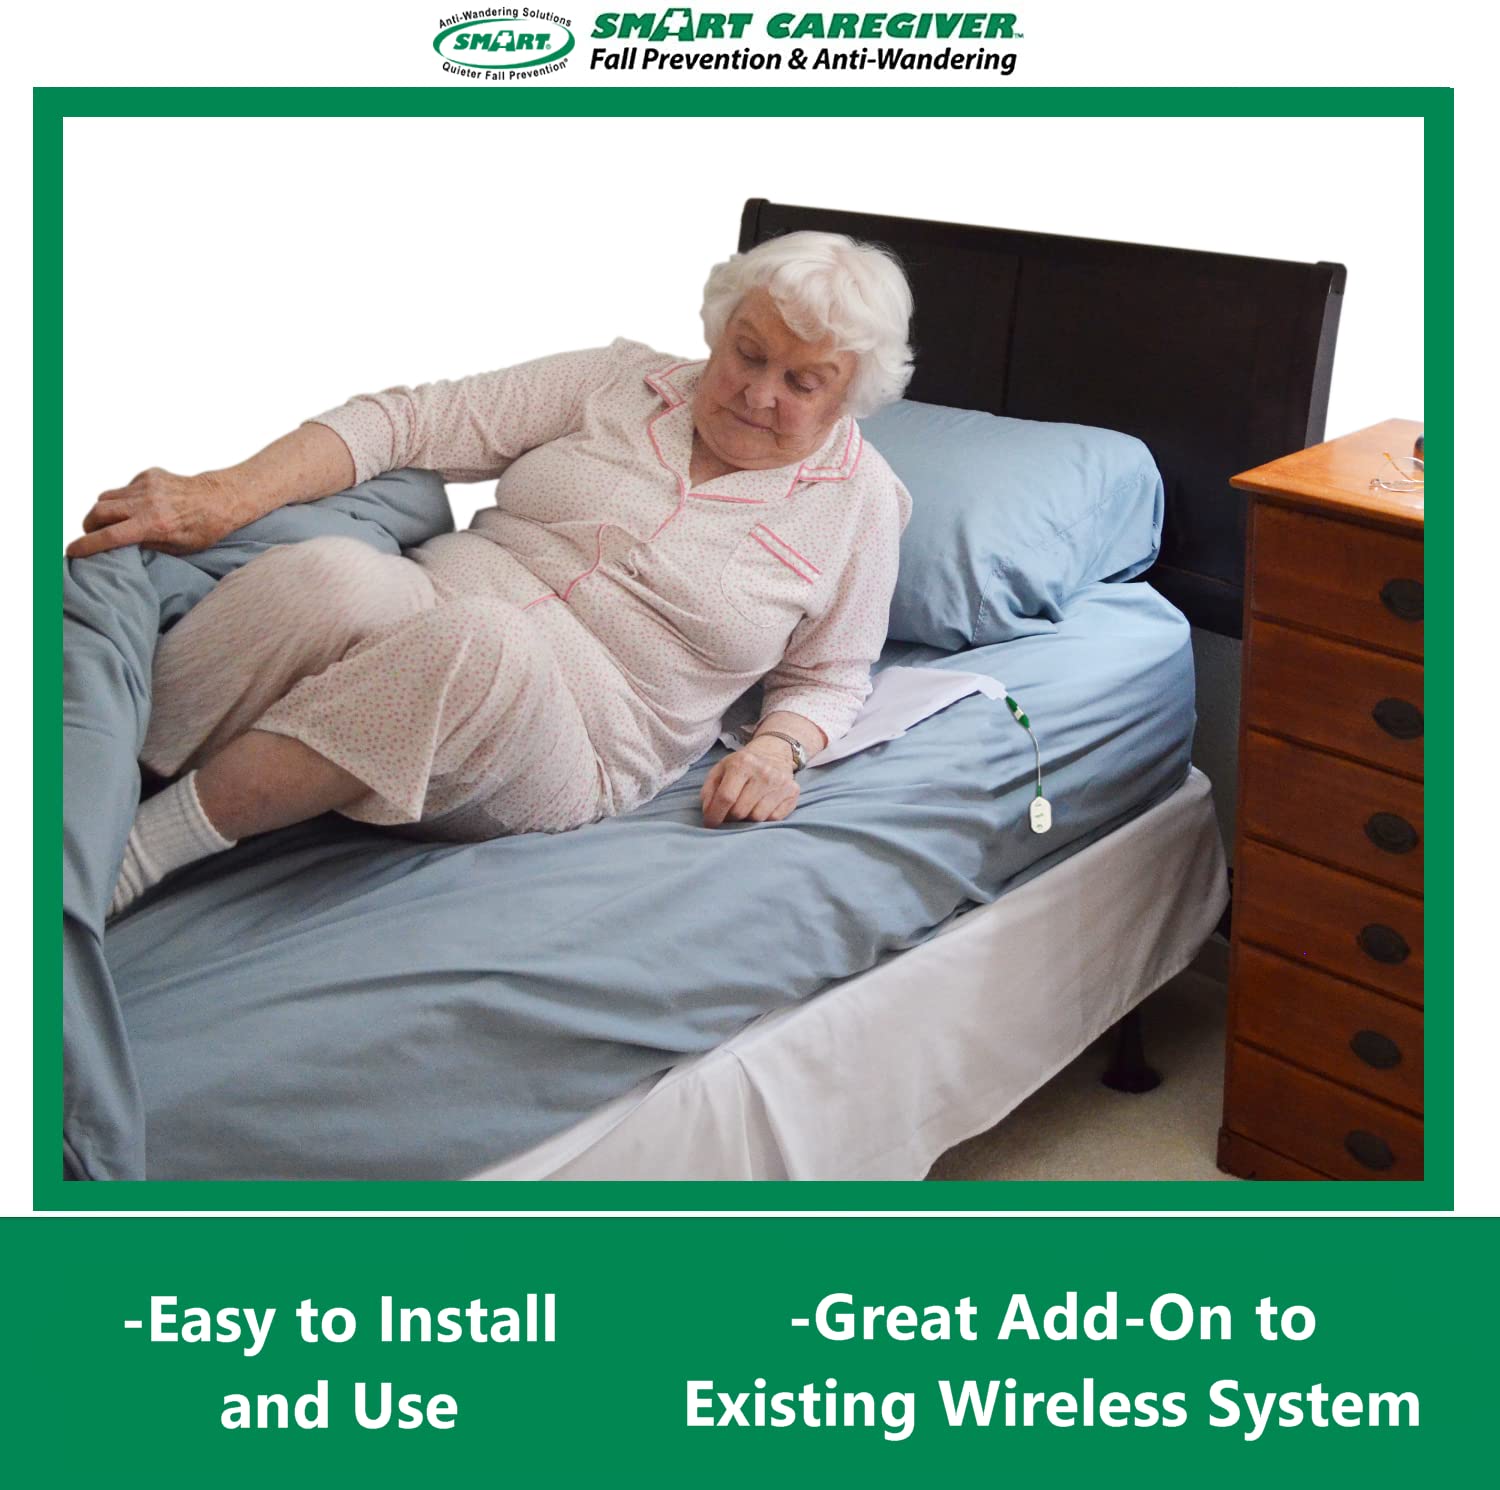 Smart Caregiver Corporation Replacement/Add-on Cordless Bed Sensor Pad - 20in x 30in Works with 433-EC and 433-CMU only